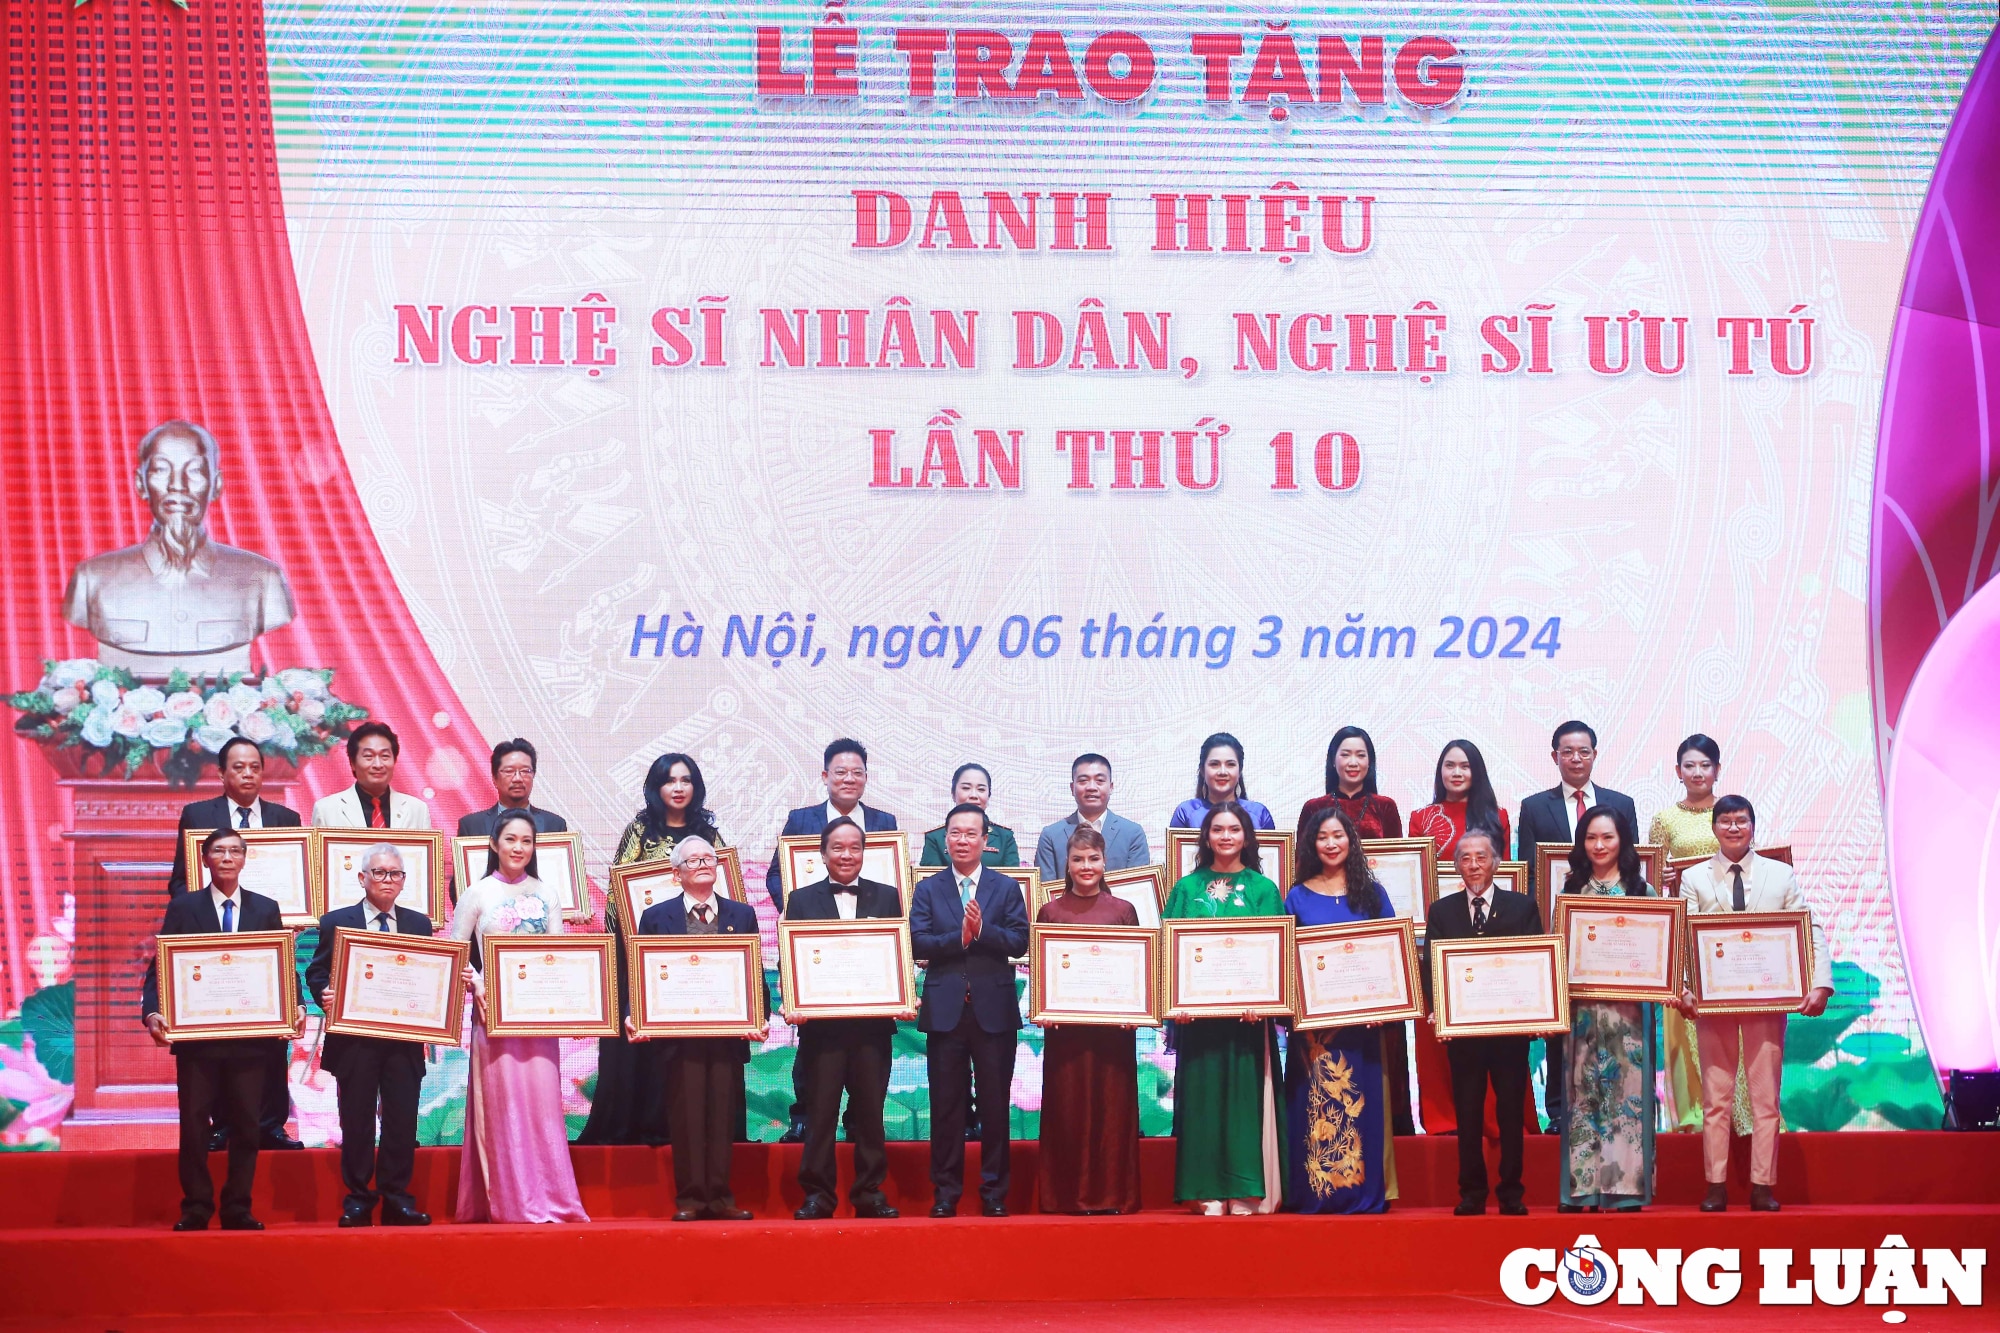 chu tich nuoc de nghi co chinh sach de cac nghe si co the song duoc bang nghe hinh 2